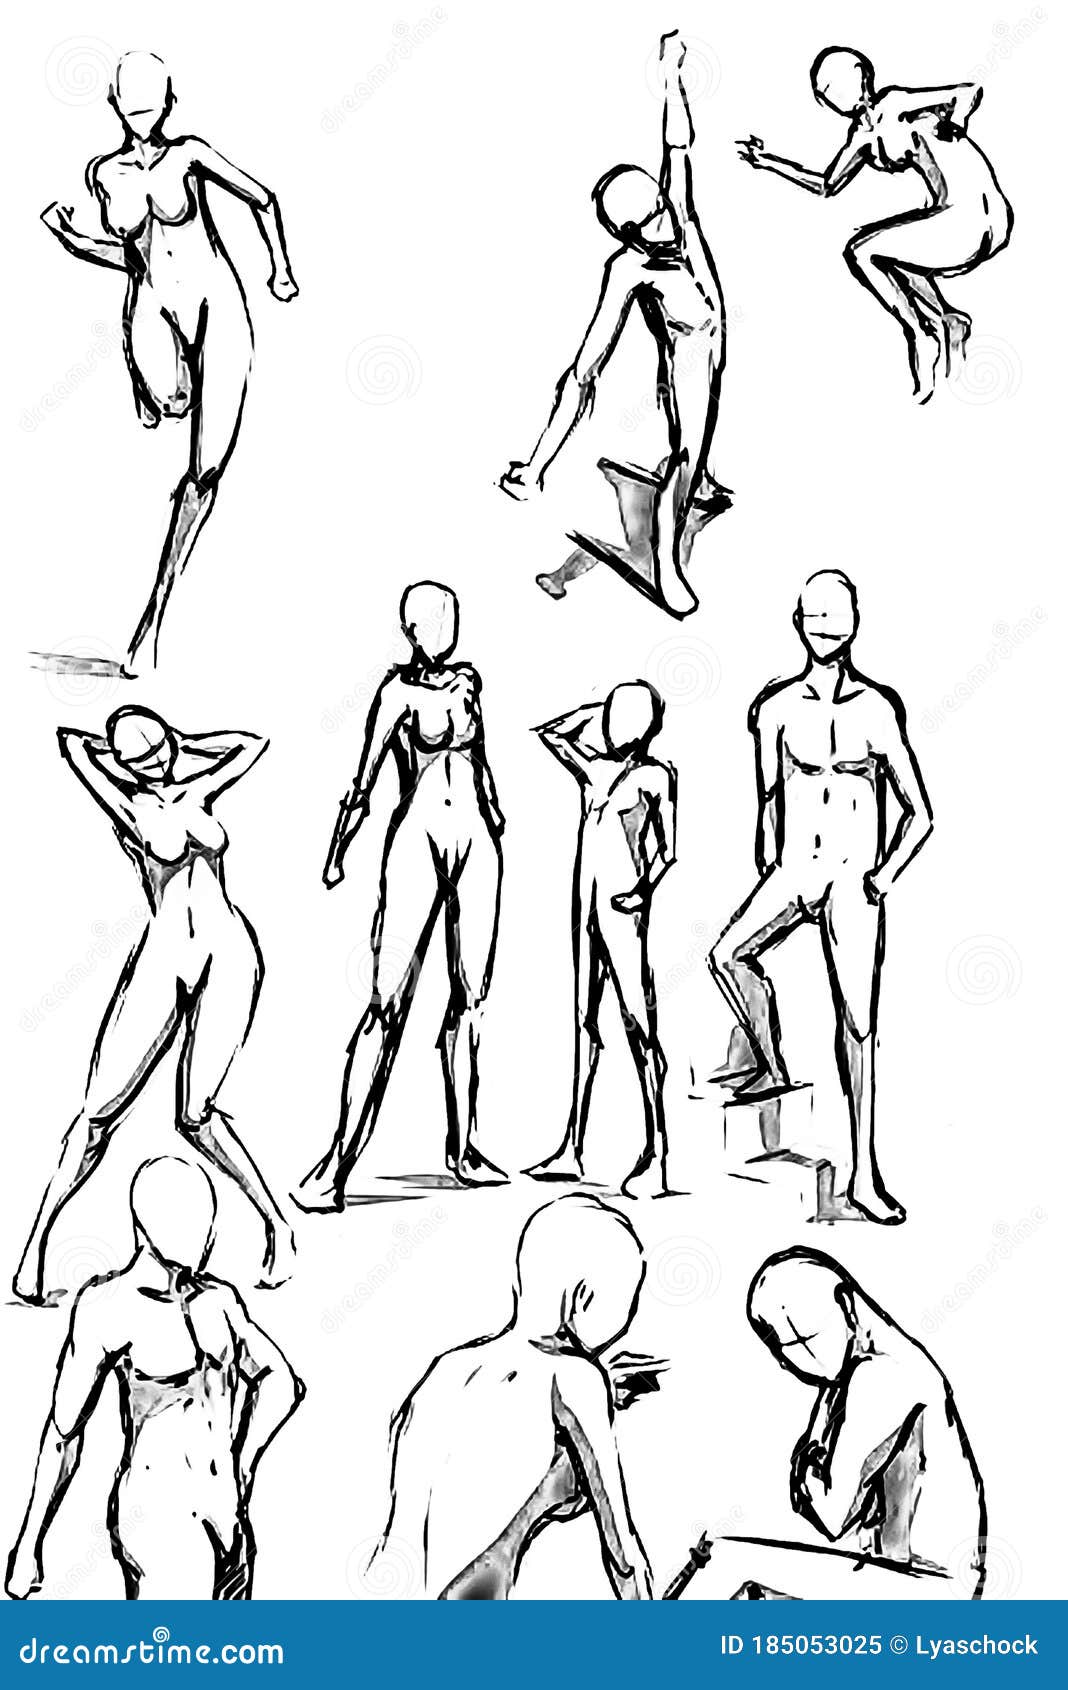 Messy practice, any helpful exercises for drawing the human figure? :  r/learntodraw